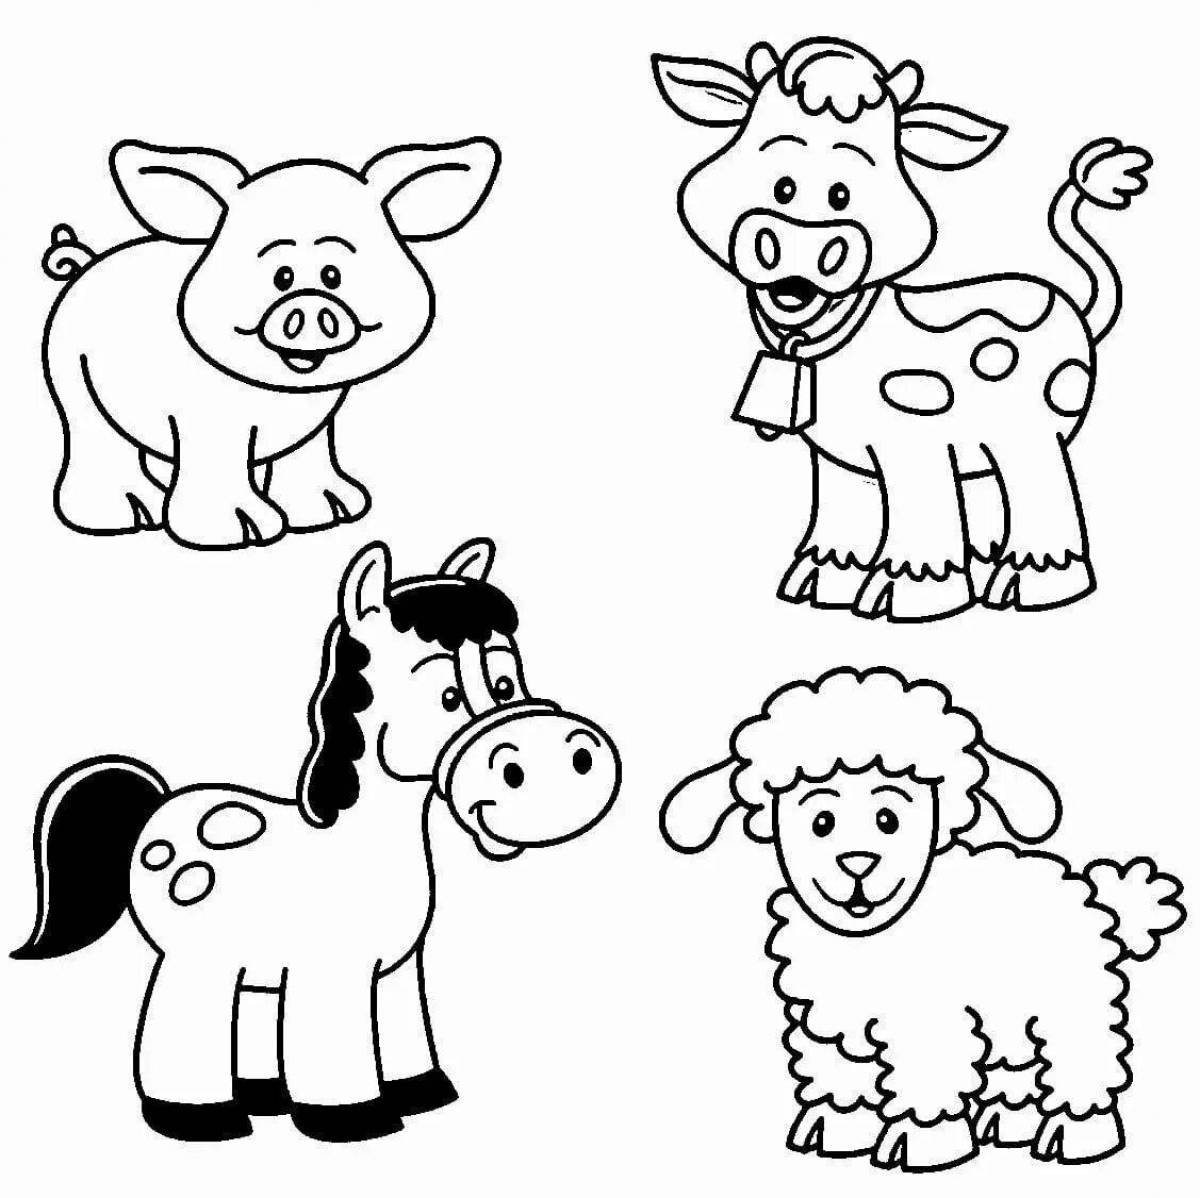 Adorable animal coloring pages